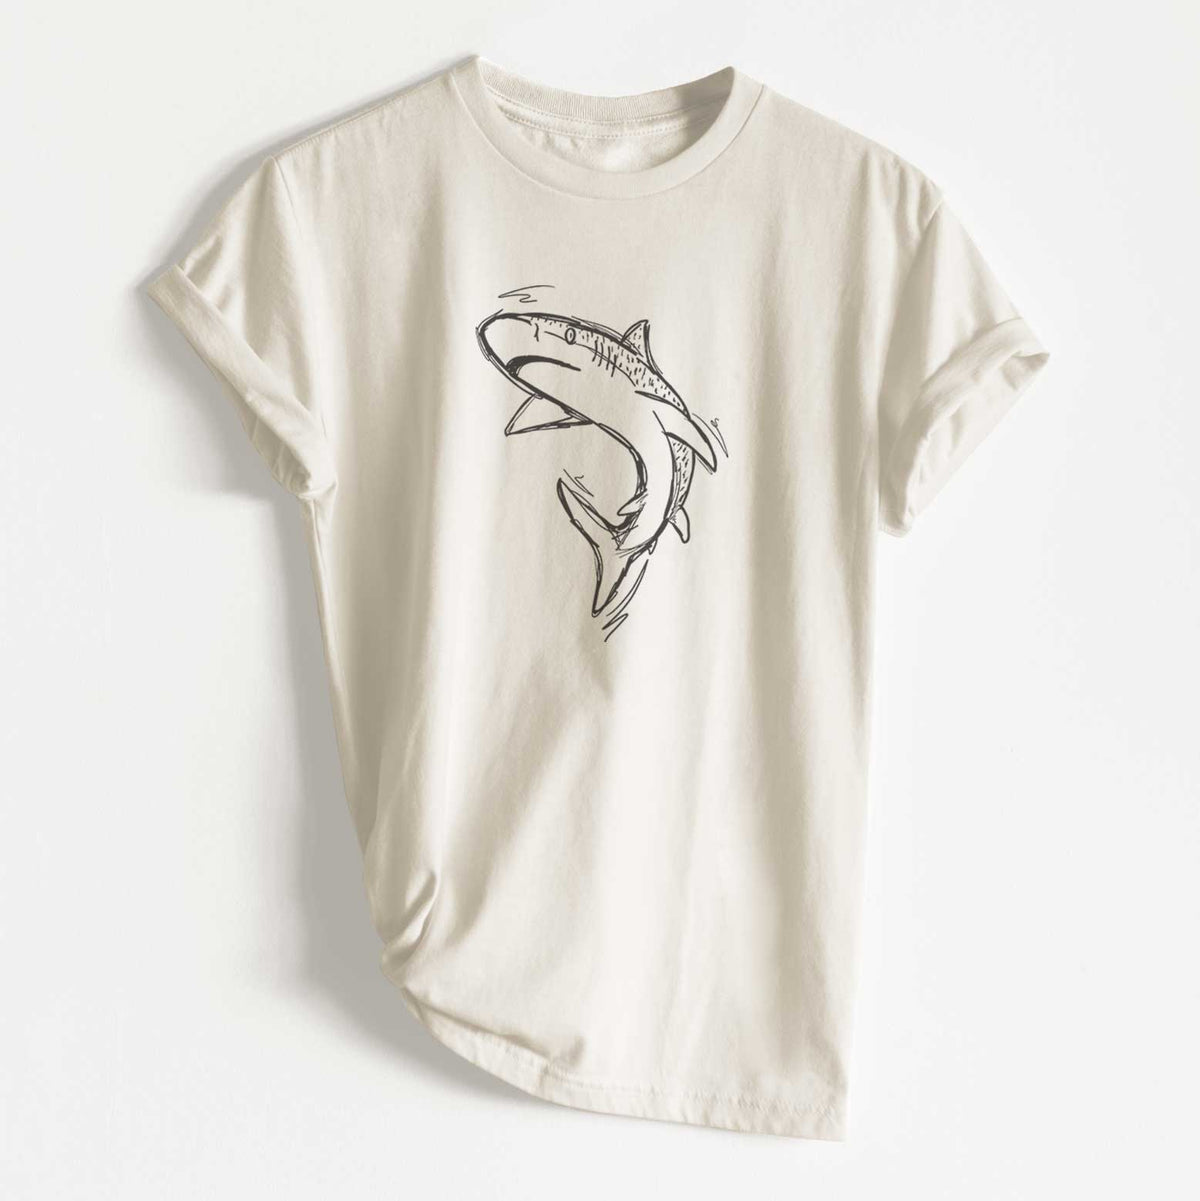 Tiger Shark - Unisex Recycled Eco Tee  - CLOSEOUT - FINAL SALE